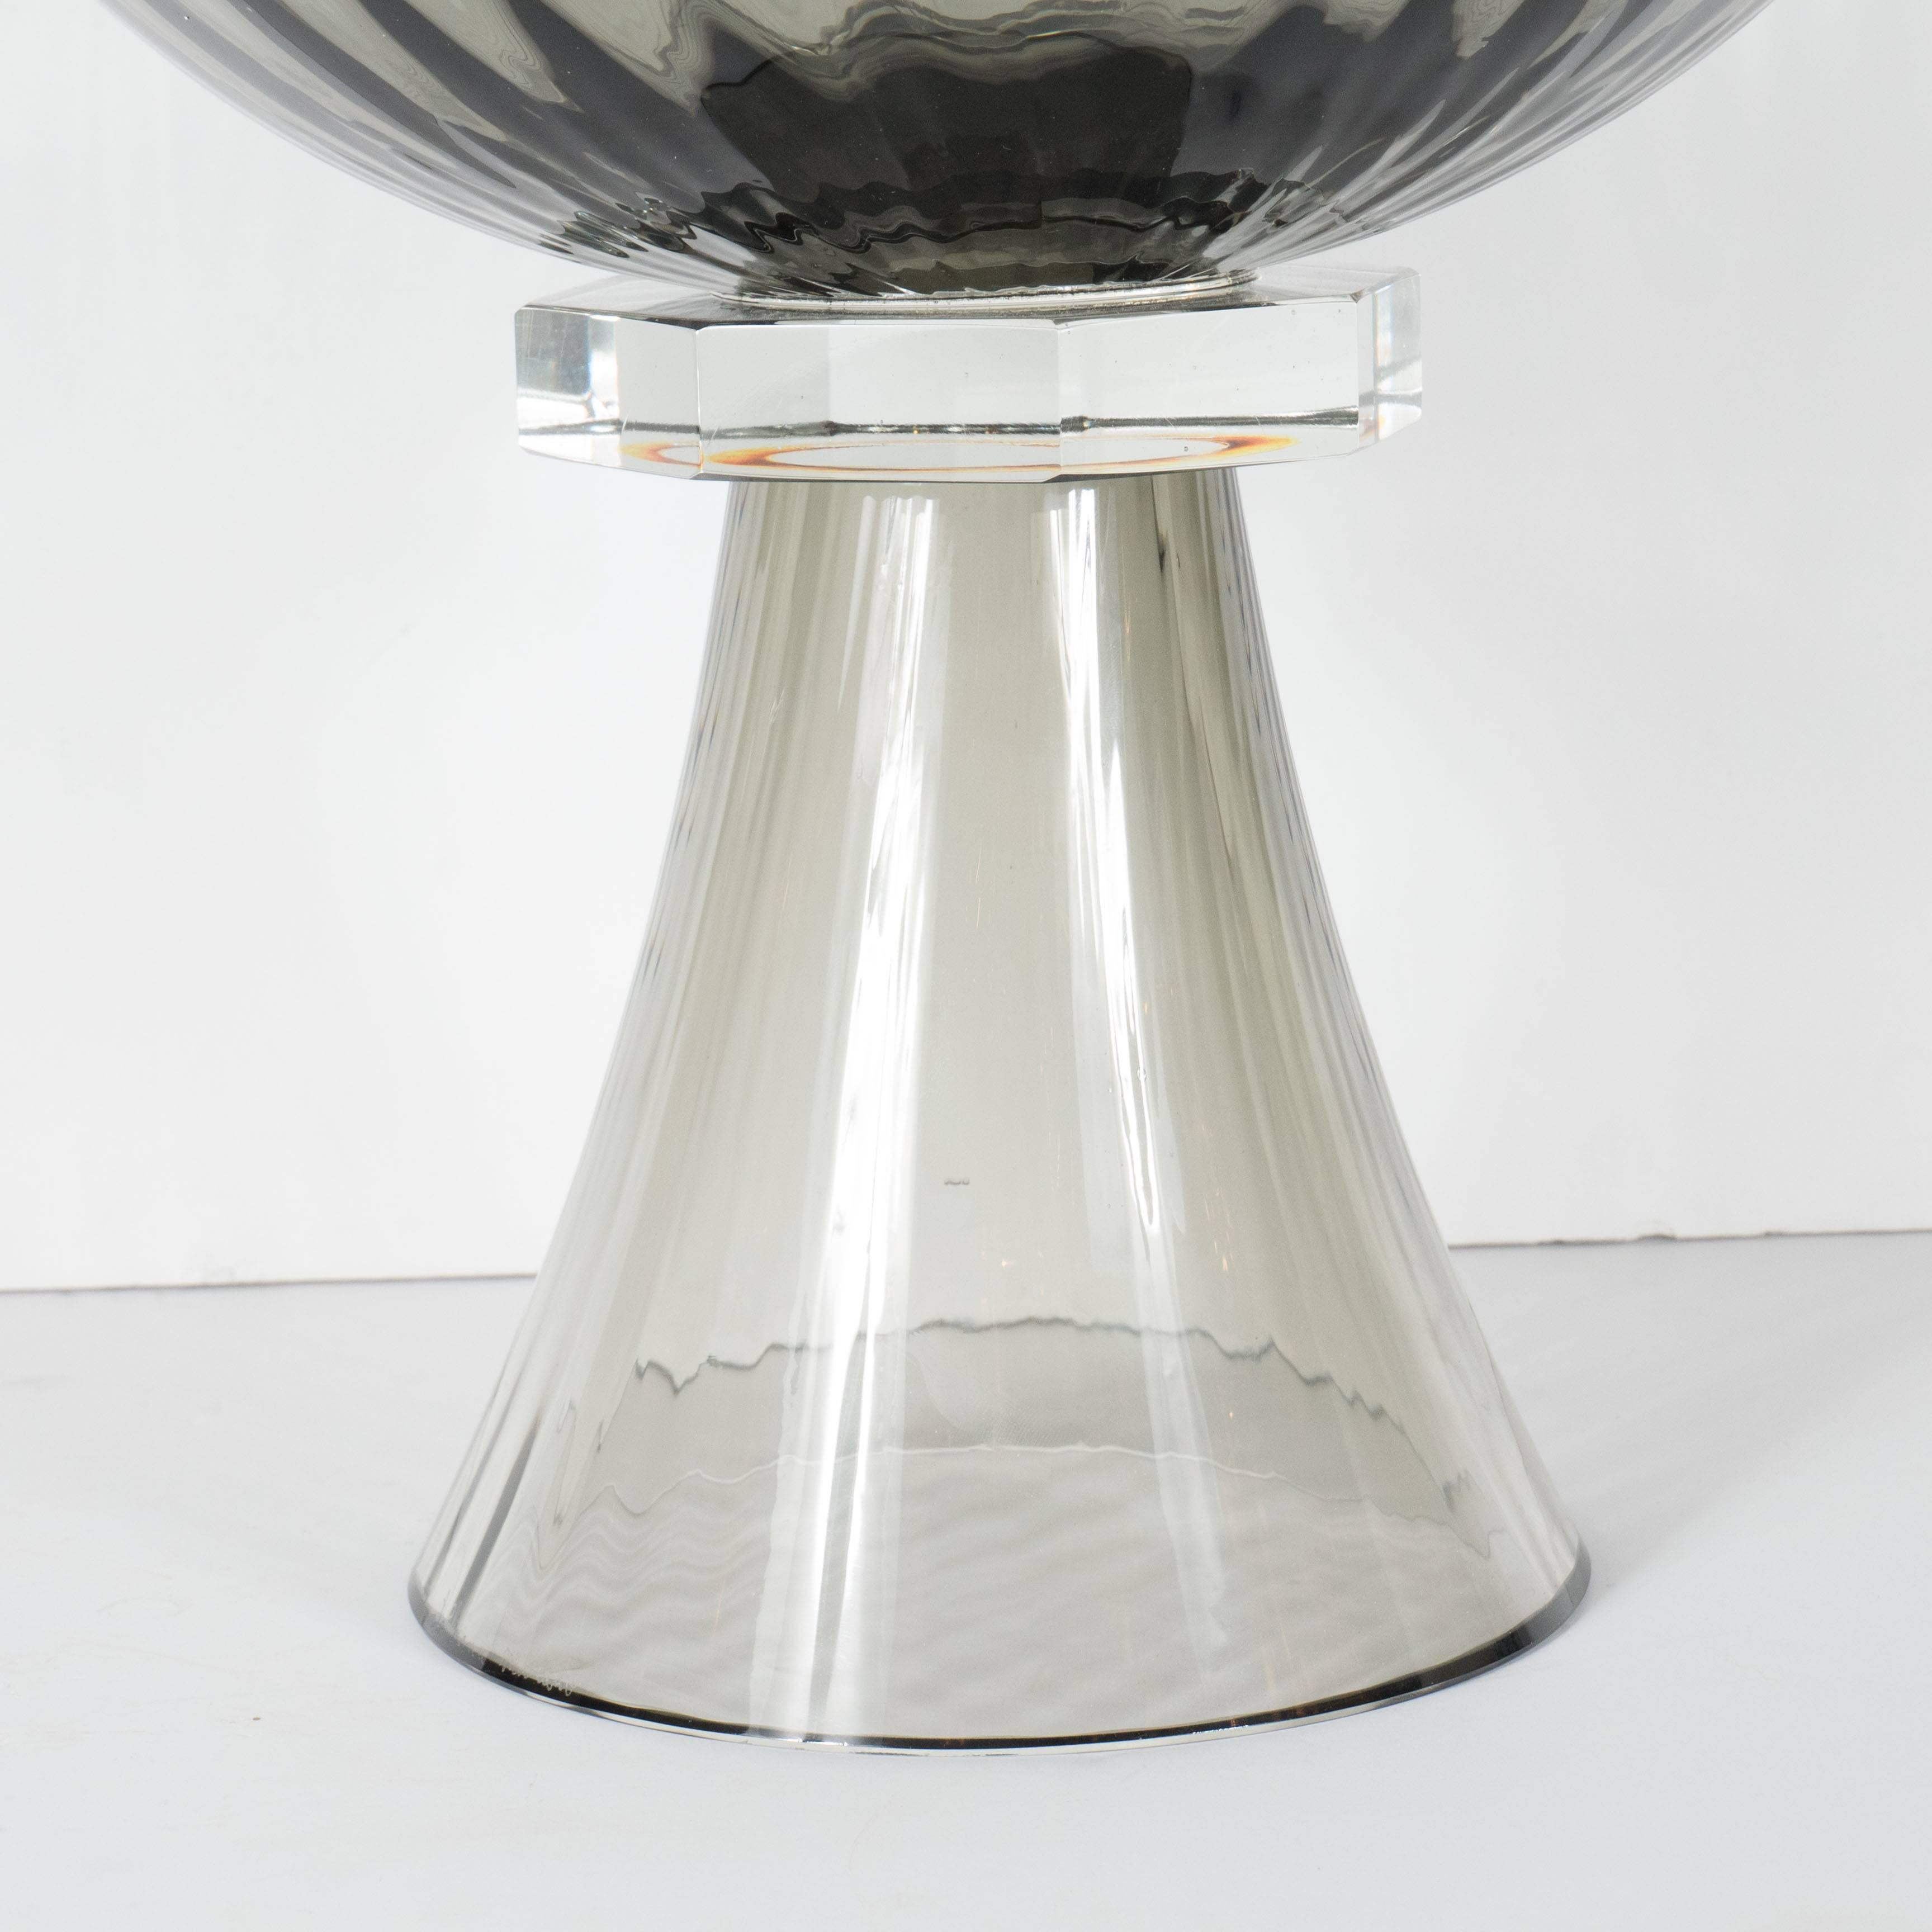 This handblown Murano glass bowl or vase features fluted footing with a tapered neck design in smoked glass. An elegant, clear octagonal glass collar supports a smoked glass bowl with fluted detail. Custom order, 6 week delivery.

Italian, 21st